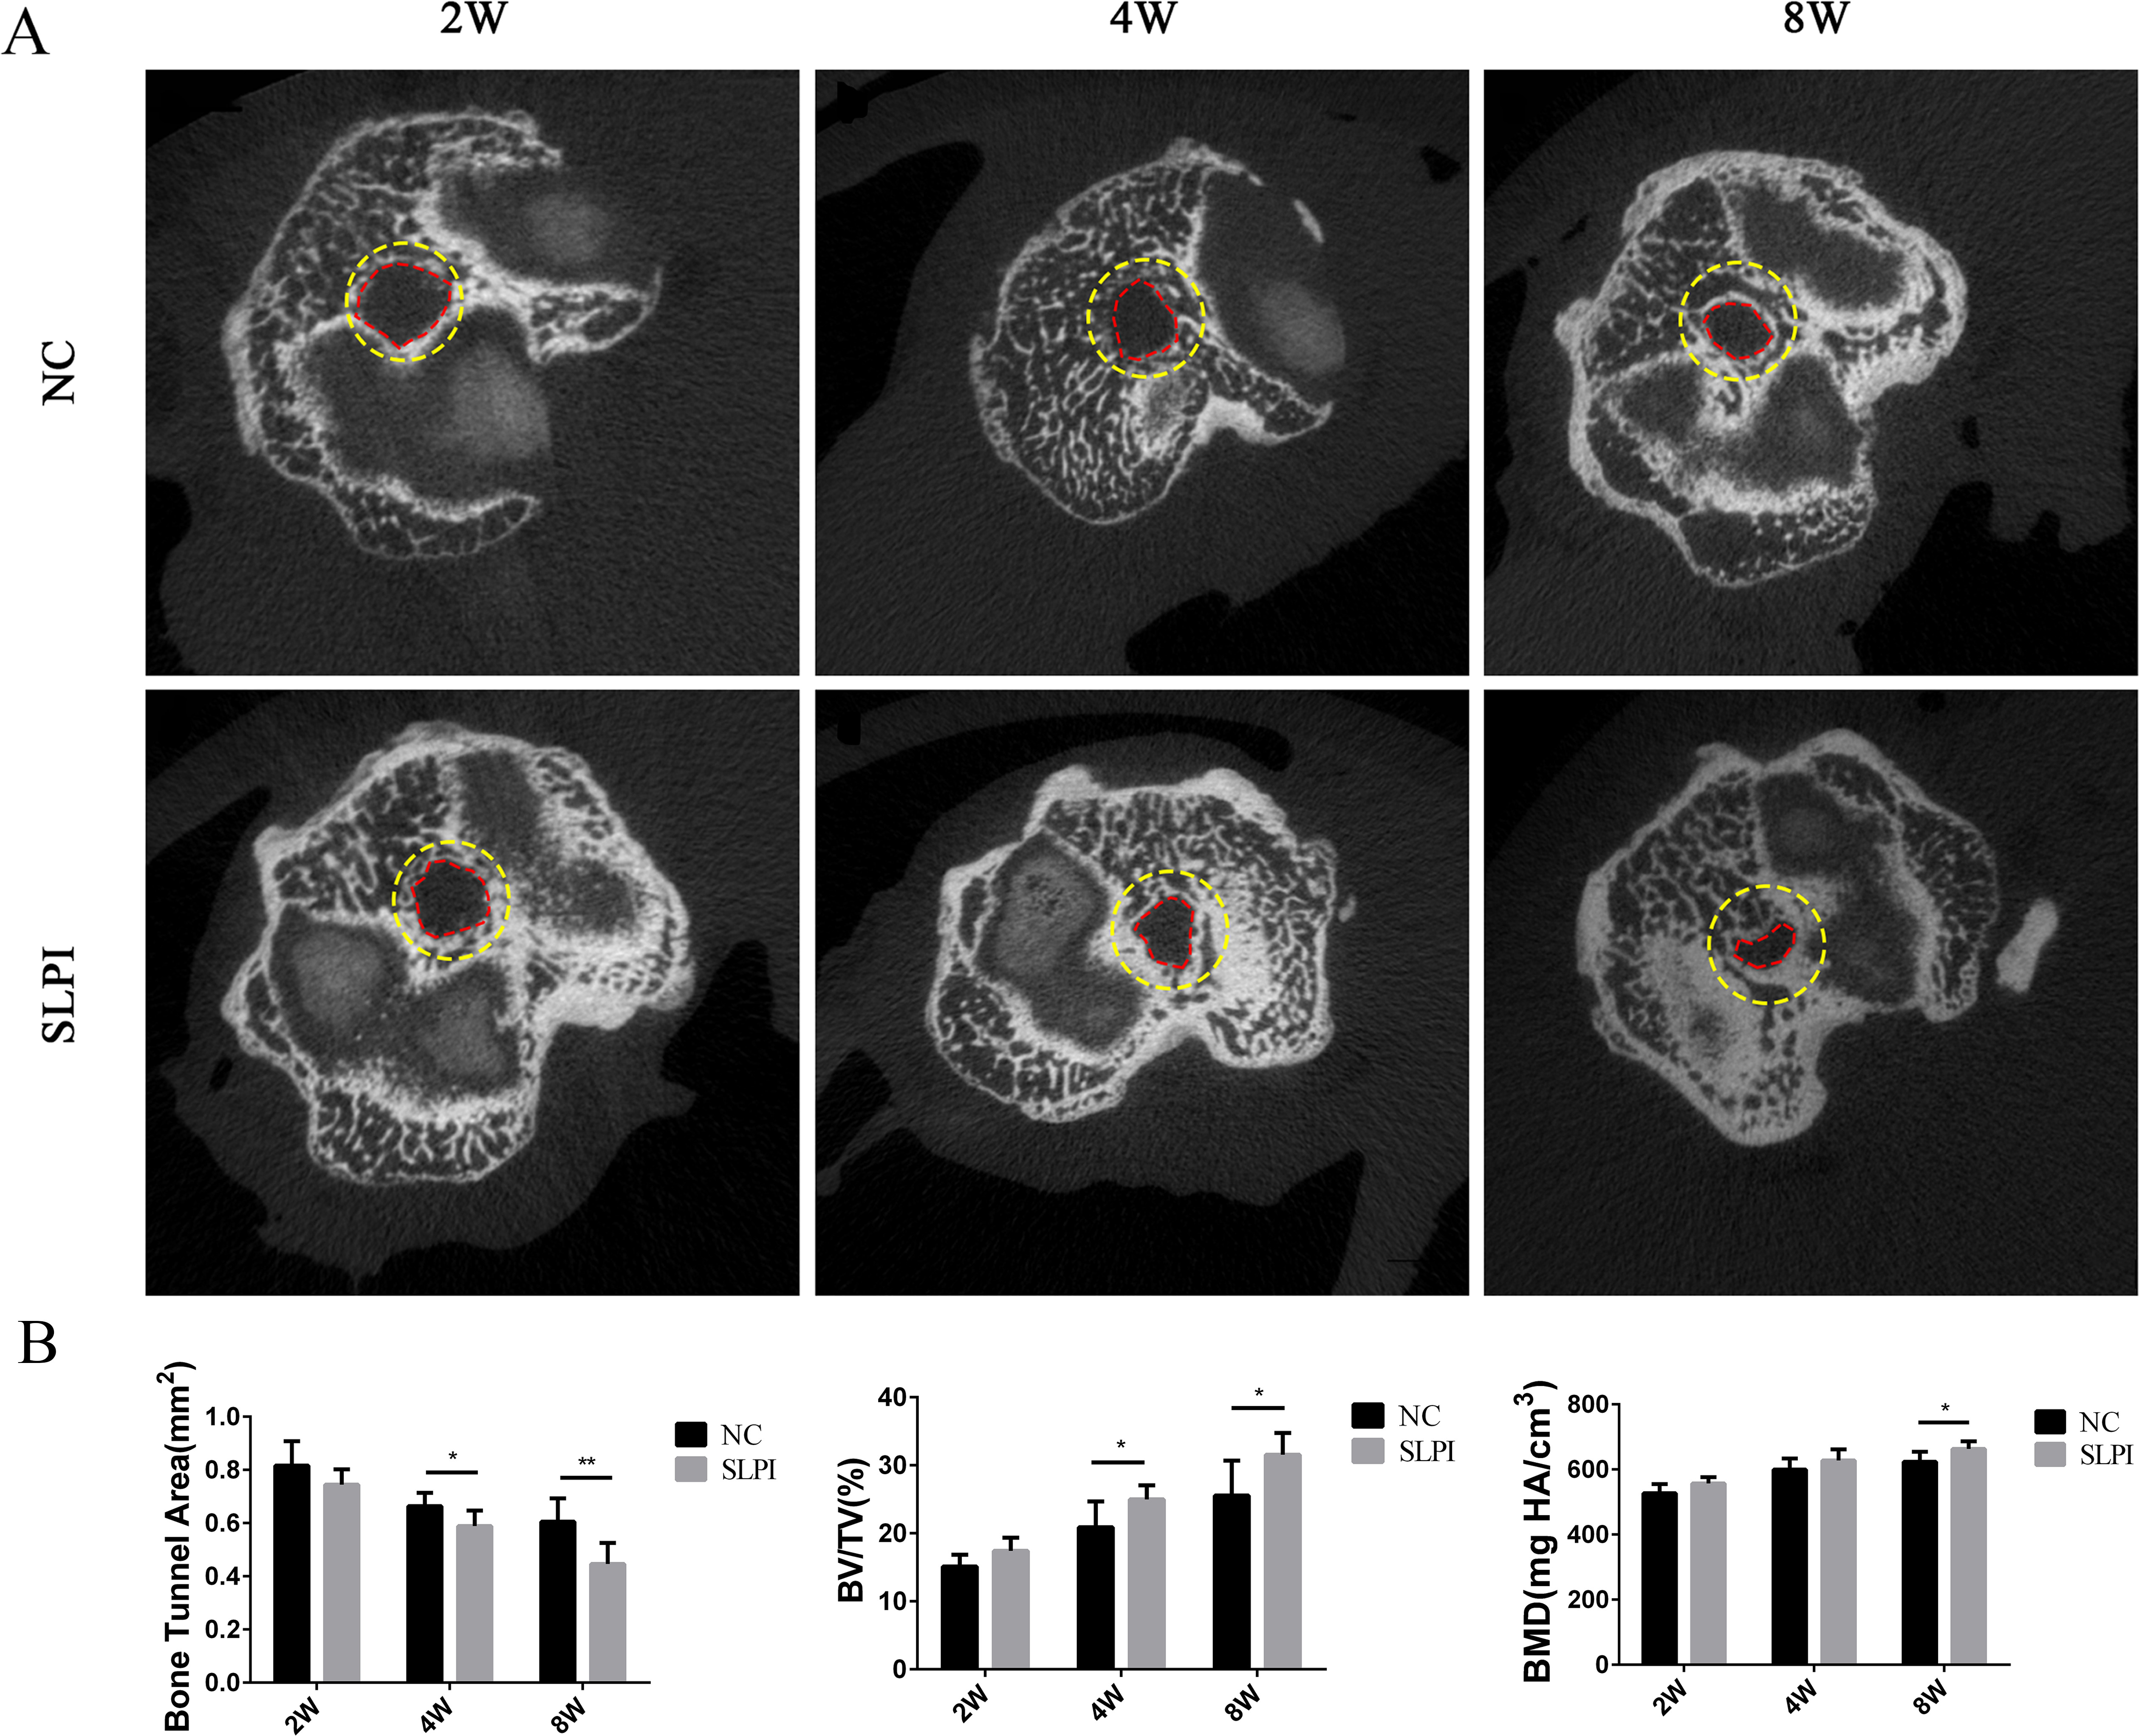 Fig. 8 
            a) Micro-CT was performed to evaluate the cross-sectional area of the tibial tunnel in the secretory leucocyte proteinase inhibitor (SLPI) and negative control (NC) groups at two, four, and eight weeks (n = 4). The planes (yellow dashed circle) were chosen at a depth of 5 mm from the tibial plateau. b) Results of bone tunnel area, bone volume/total volume (BV/TV (%)), and bone mineralization density (BMD) of the samples from each of the two groups at two, four, and eight weeks. The results are expressed as mean and standard deviations, *p < 0.05; **p < 0.01. The red dashed line indicates the outline of the bone tunnel.
          